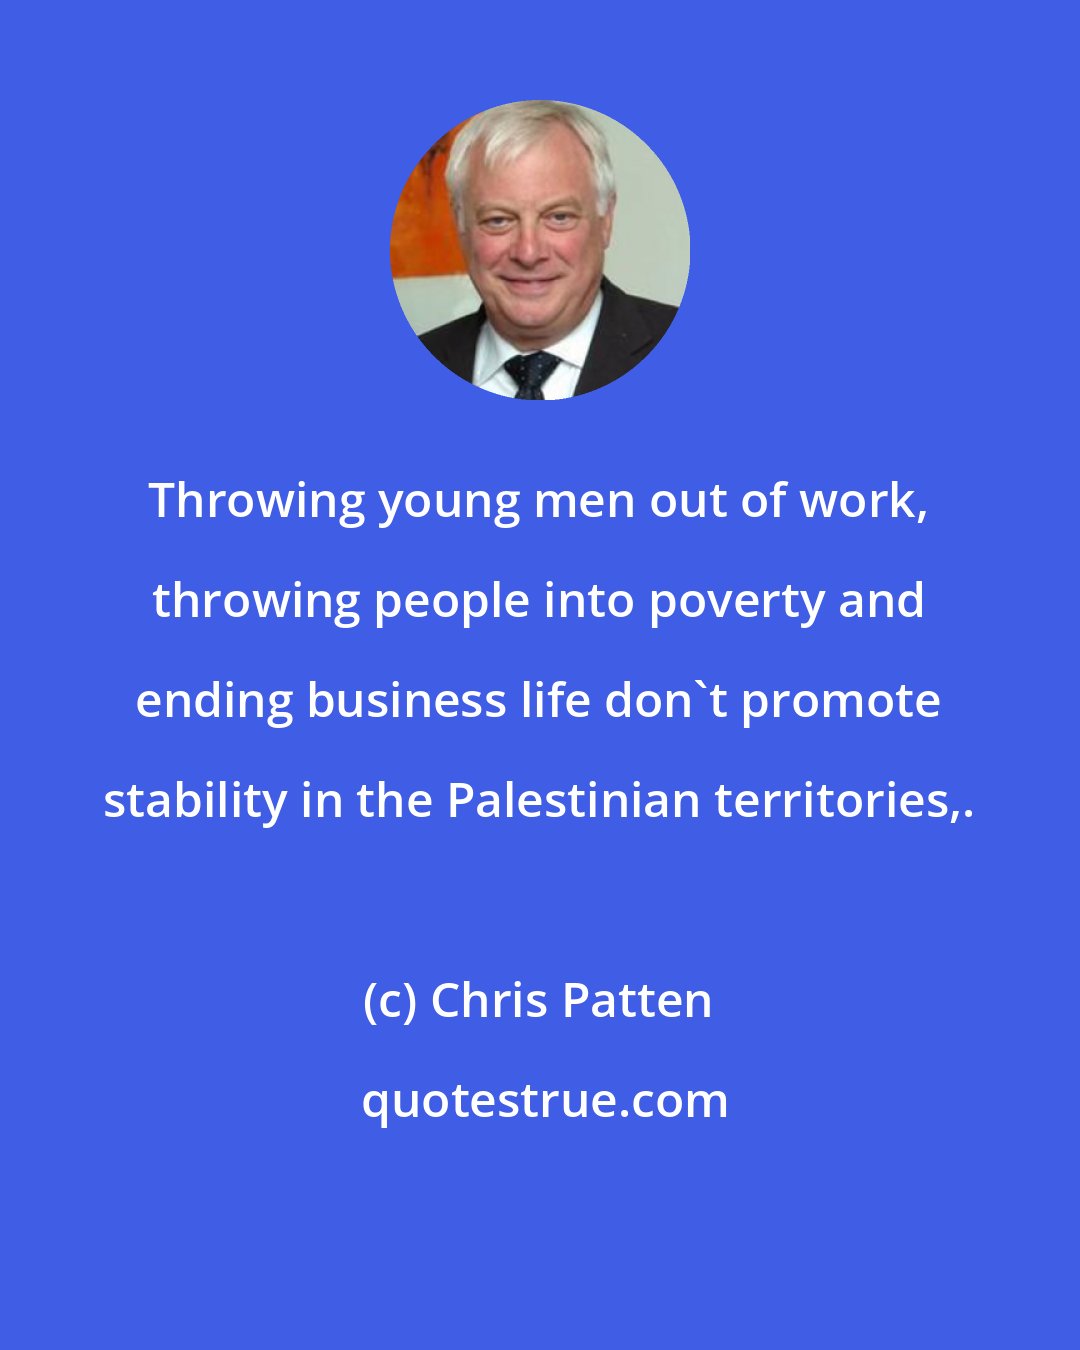 Chris Patten: Throwing young men out of work, throwing people into poverty and ending business life don't promote stability in the Palestinian territories,.